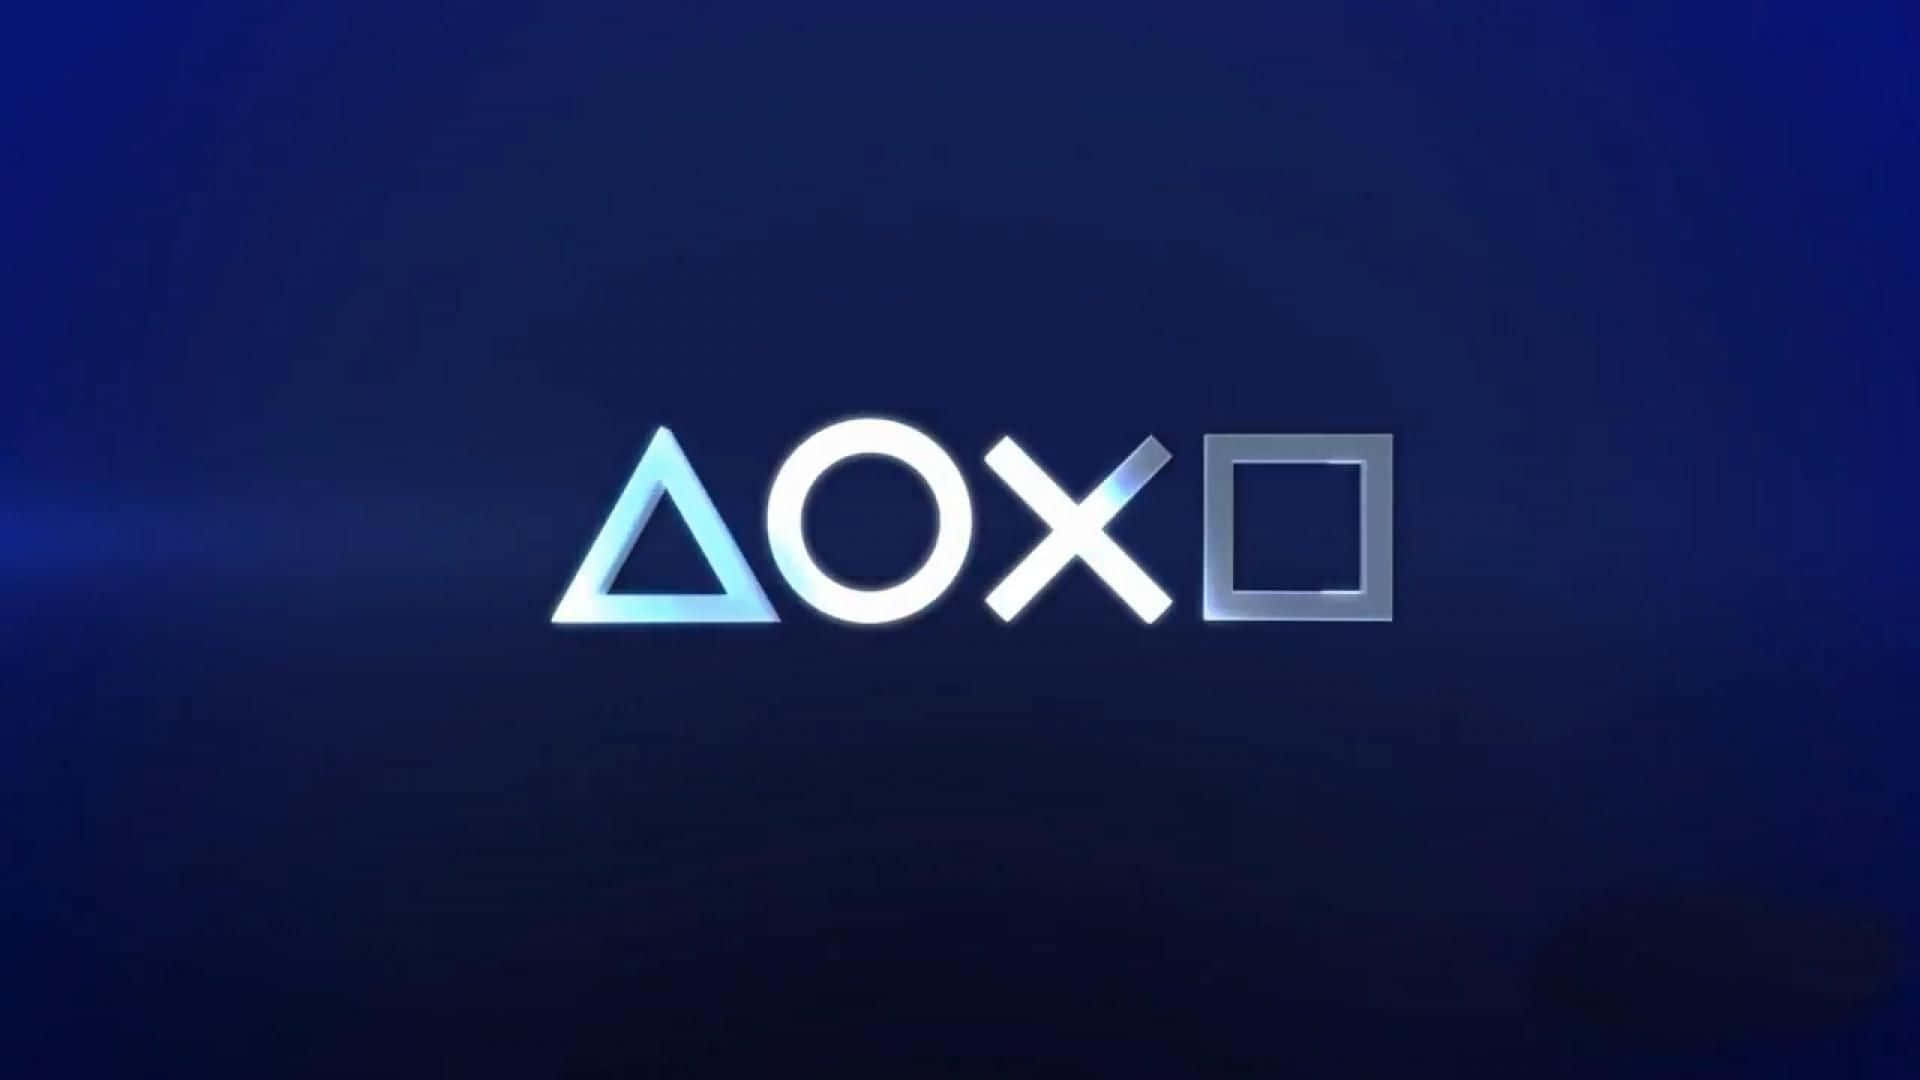 Simple Default Cool Ps4 In Large Shiny White Font Wallpaper